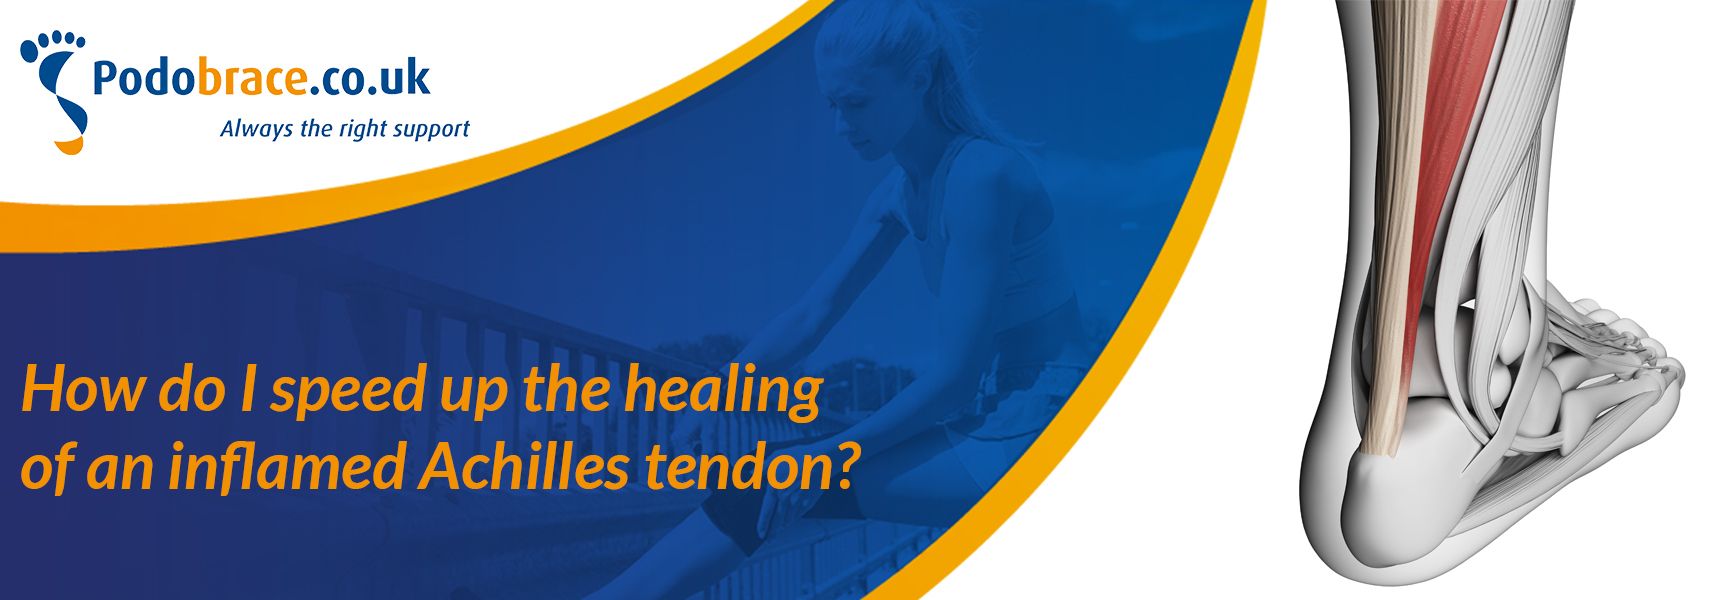 how do i speed up the healing of an inflamed achilles tendon